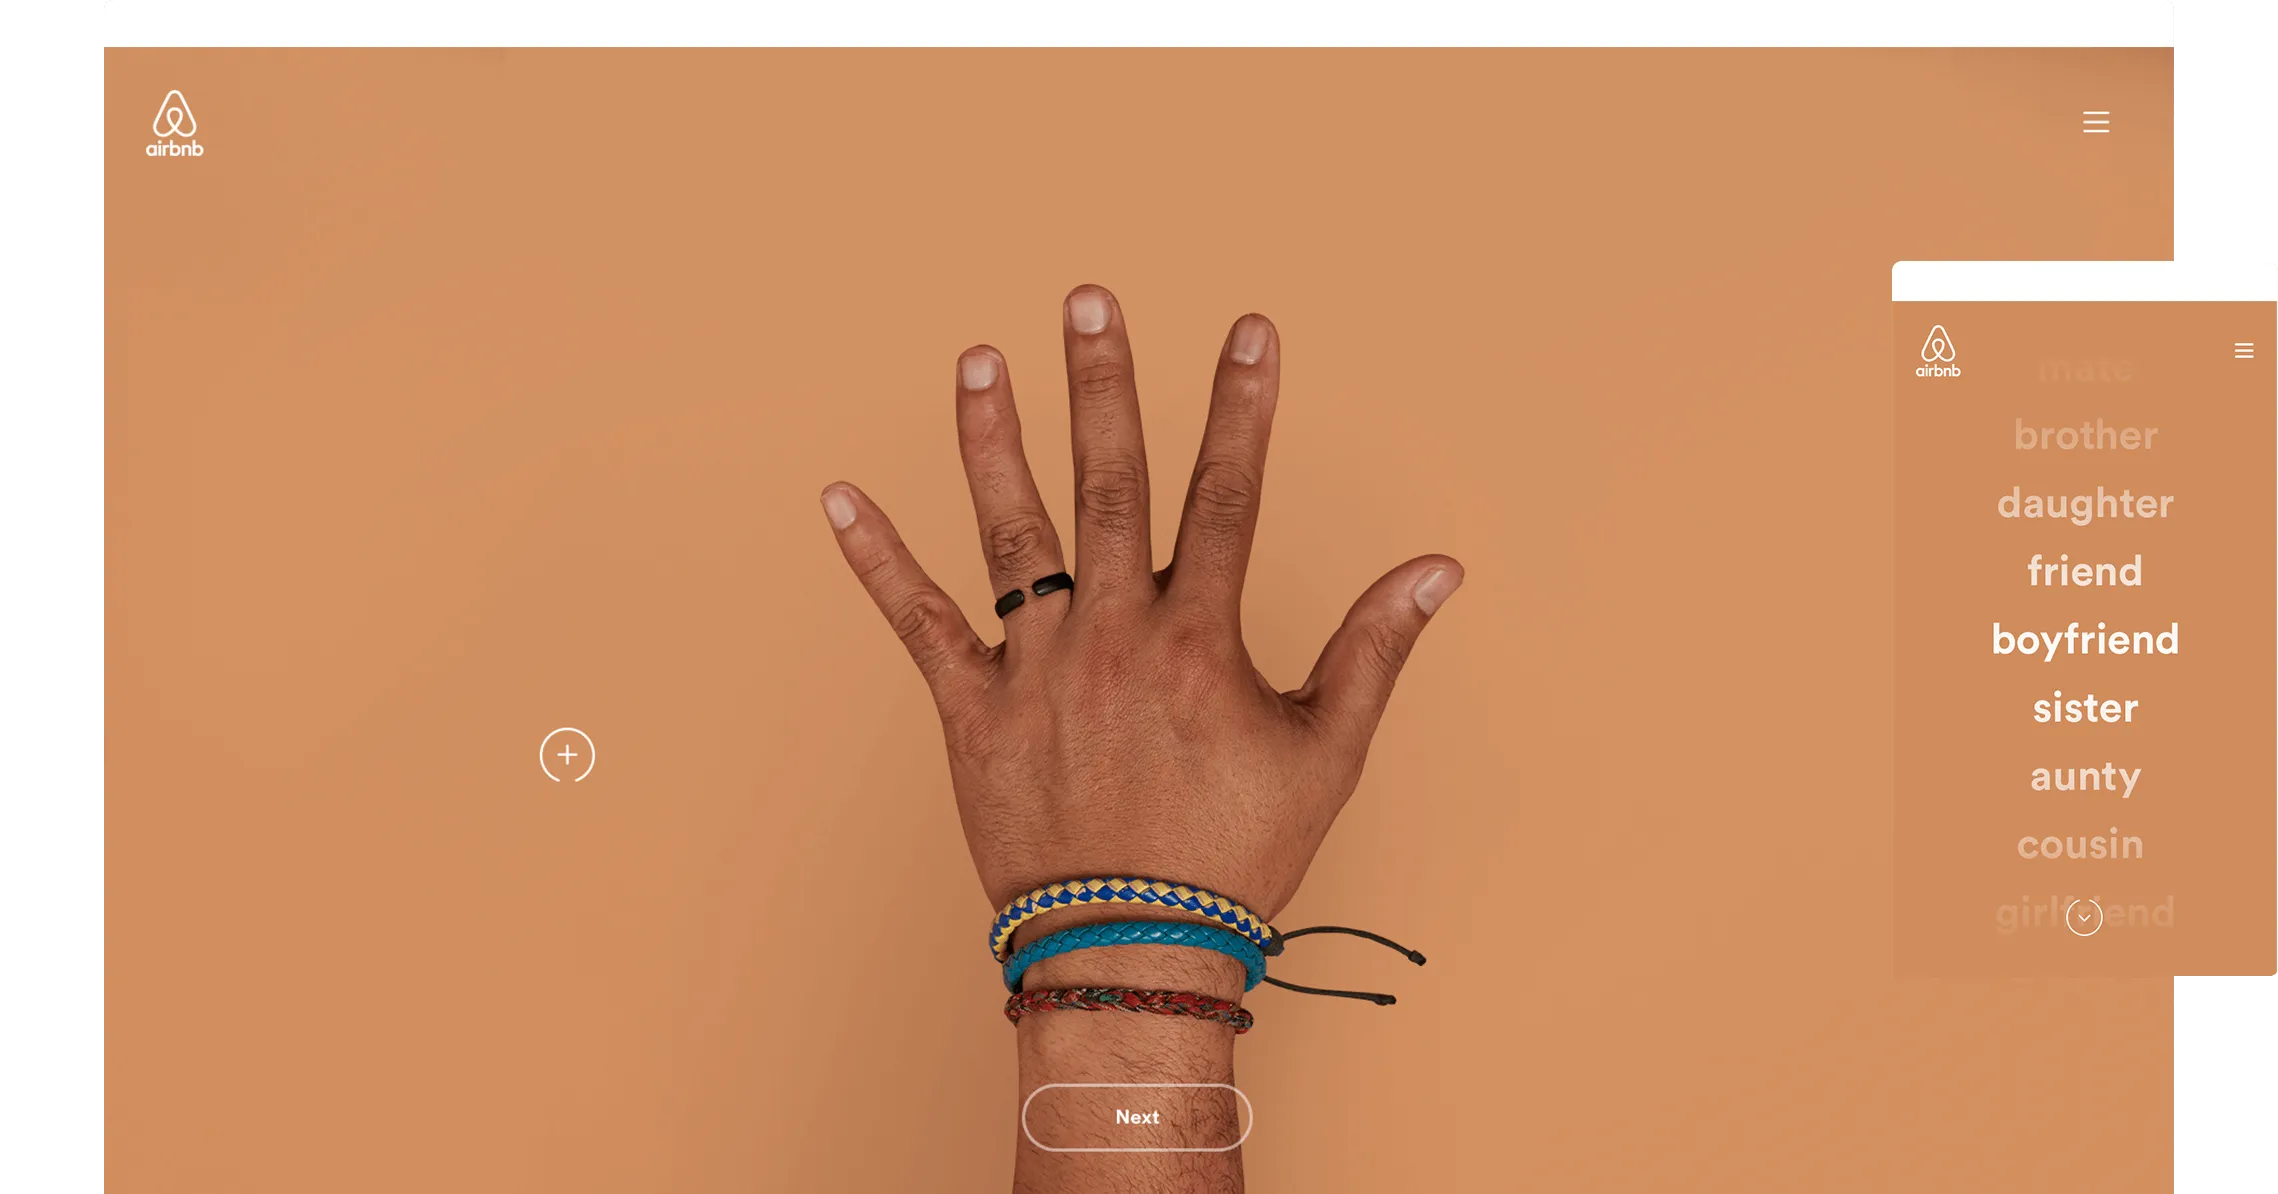 Screen from the creative web experience, showing the hand selector